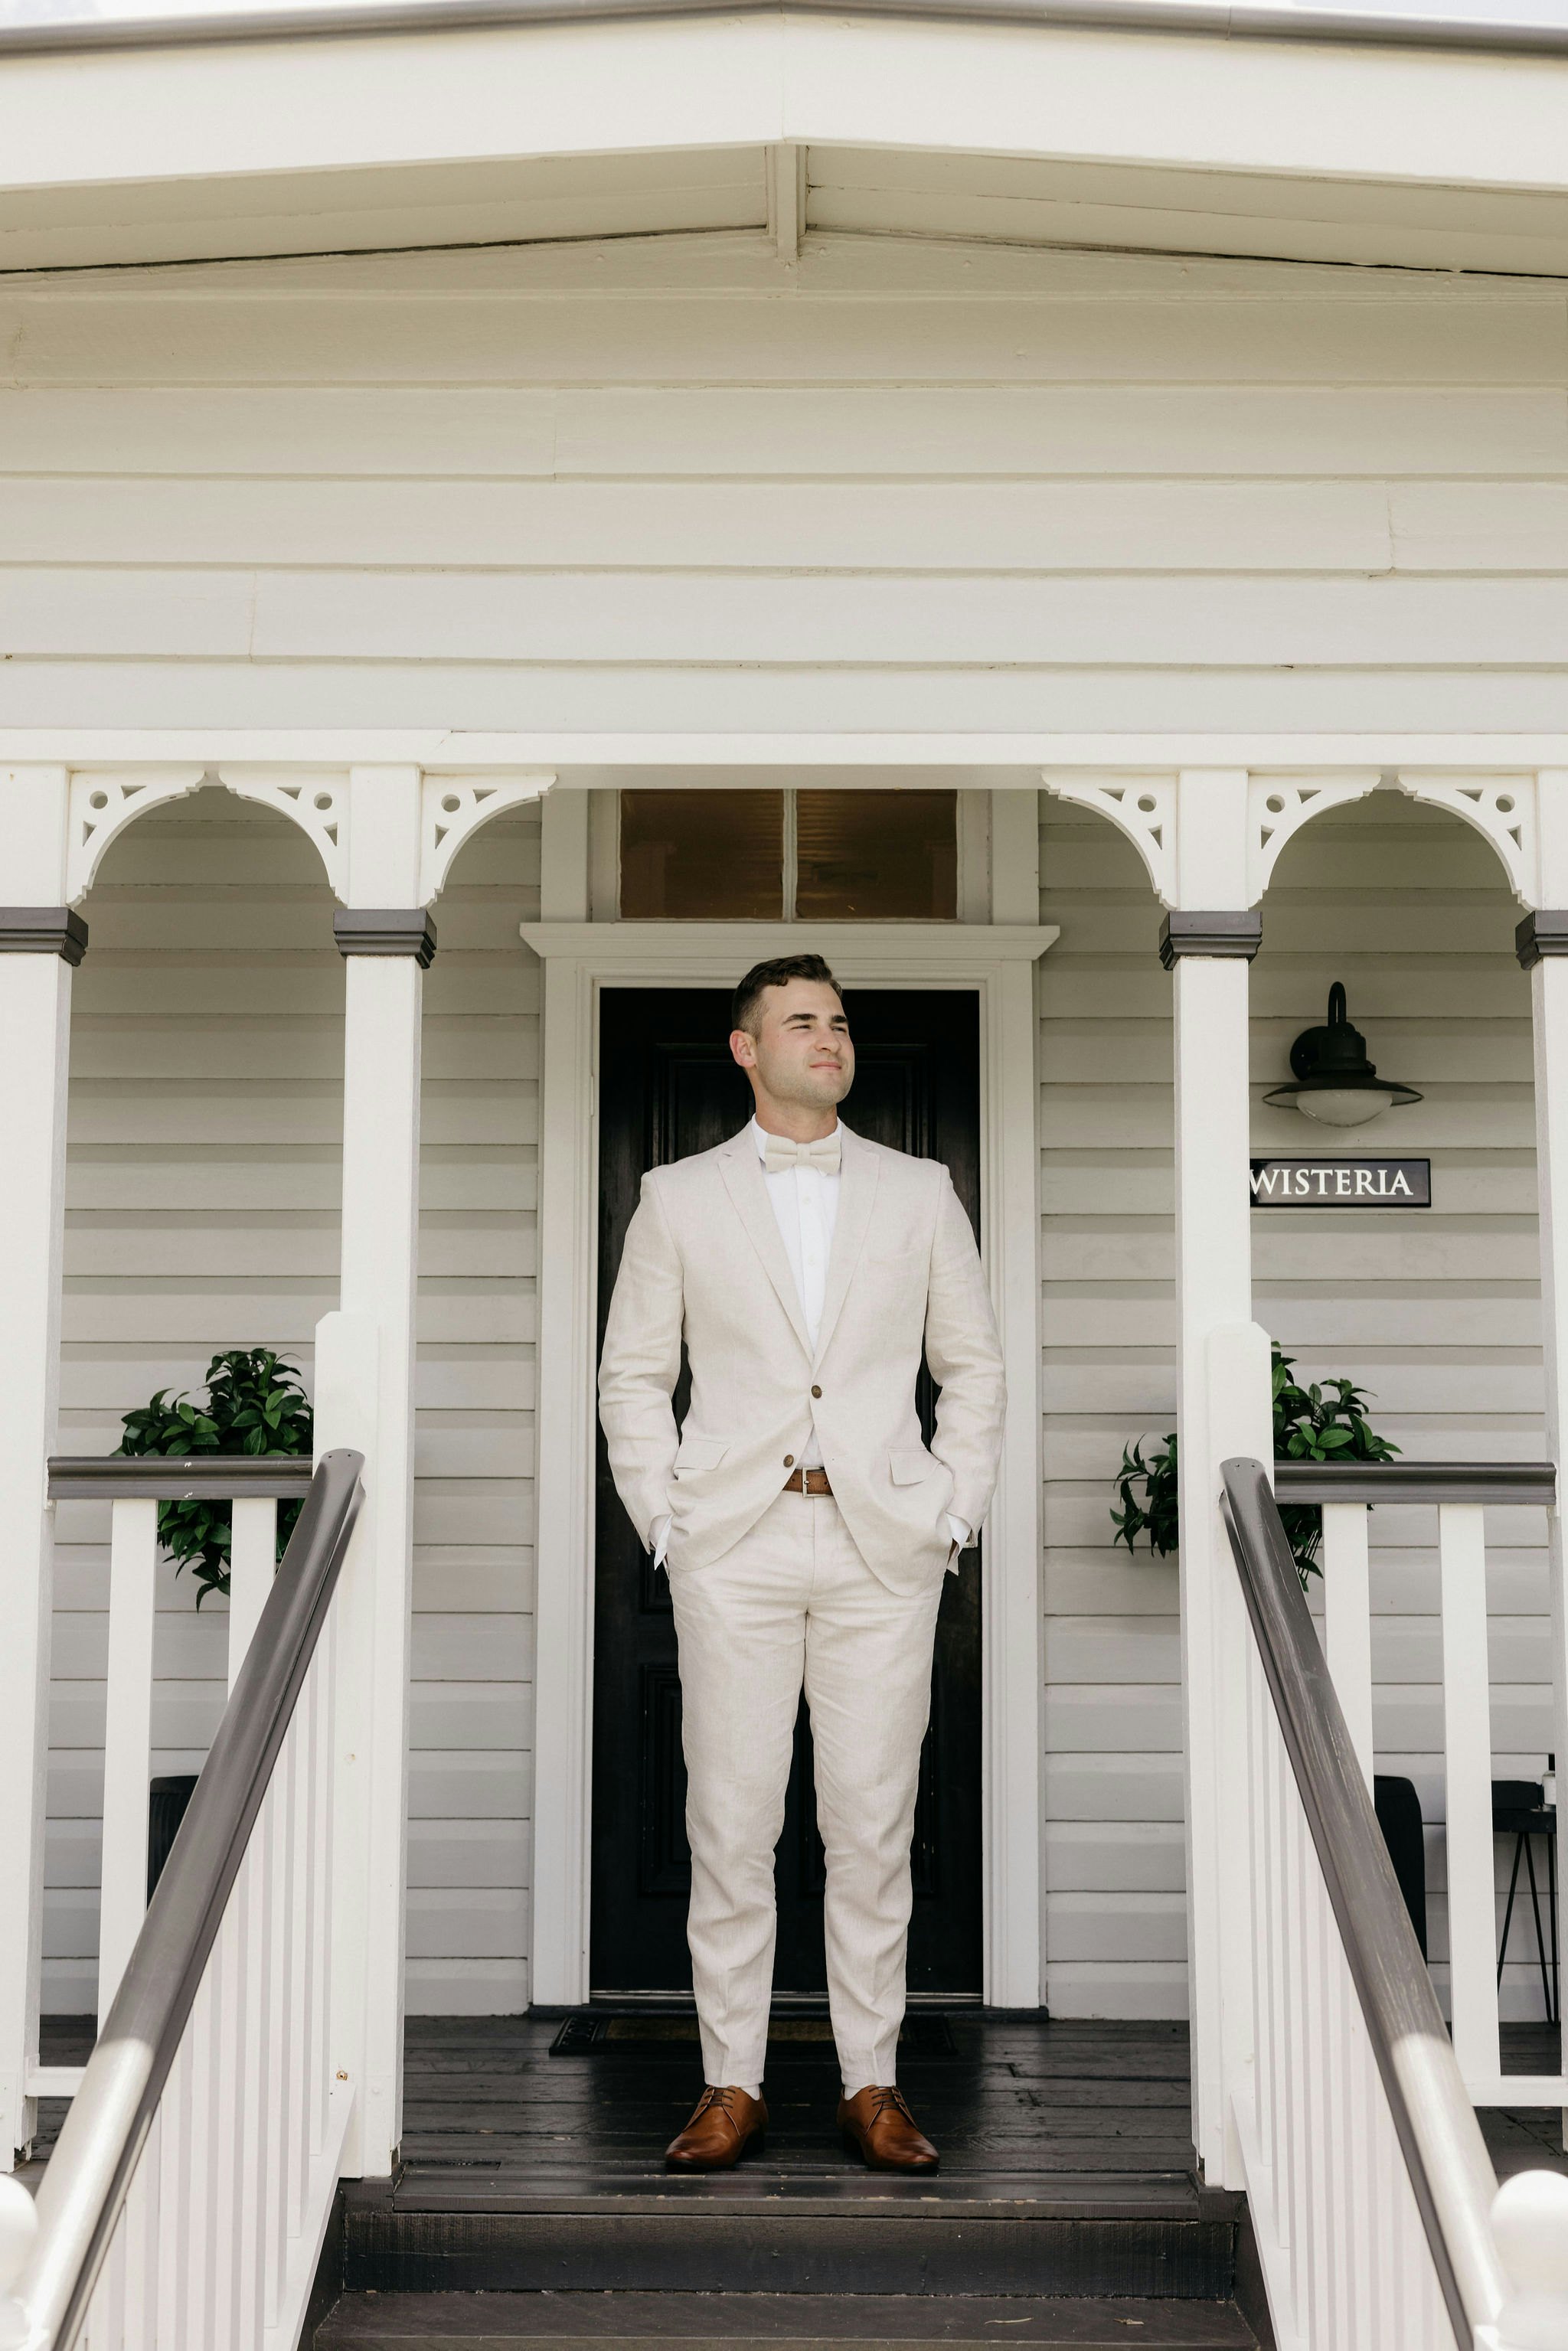 Man standing on steps at front of house